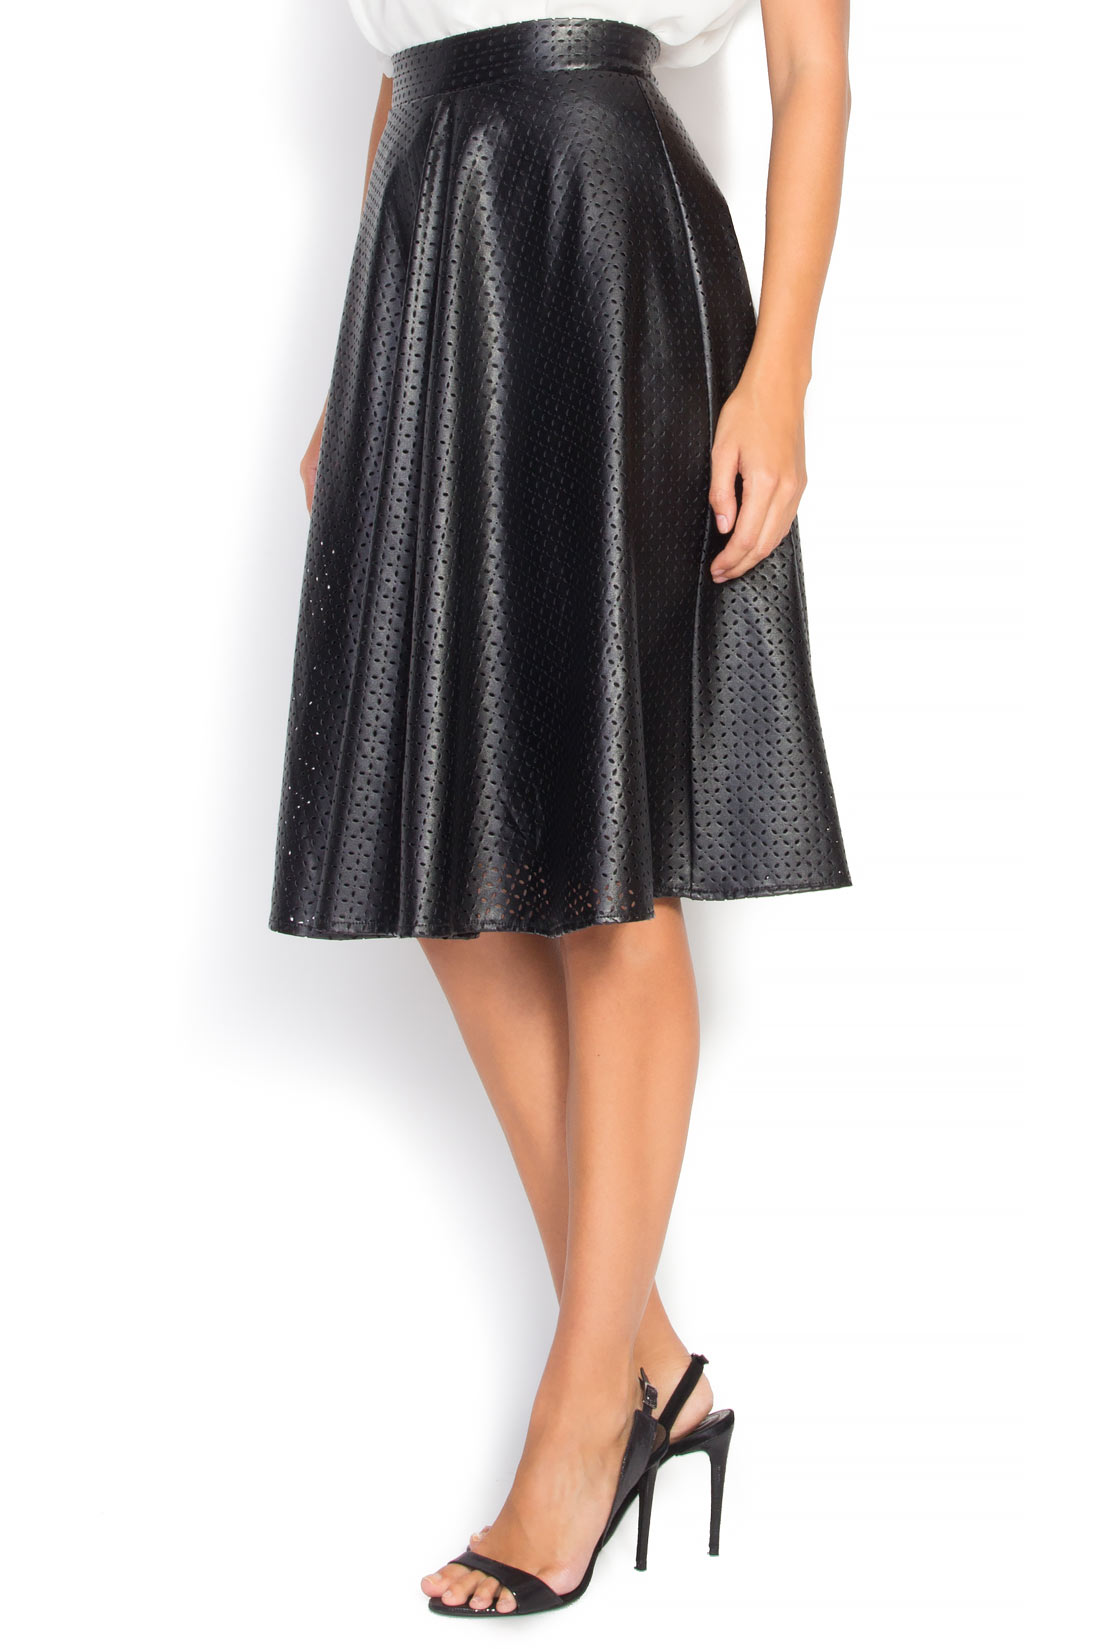 Perforated faux-leather skirt Bluzat image 1